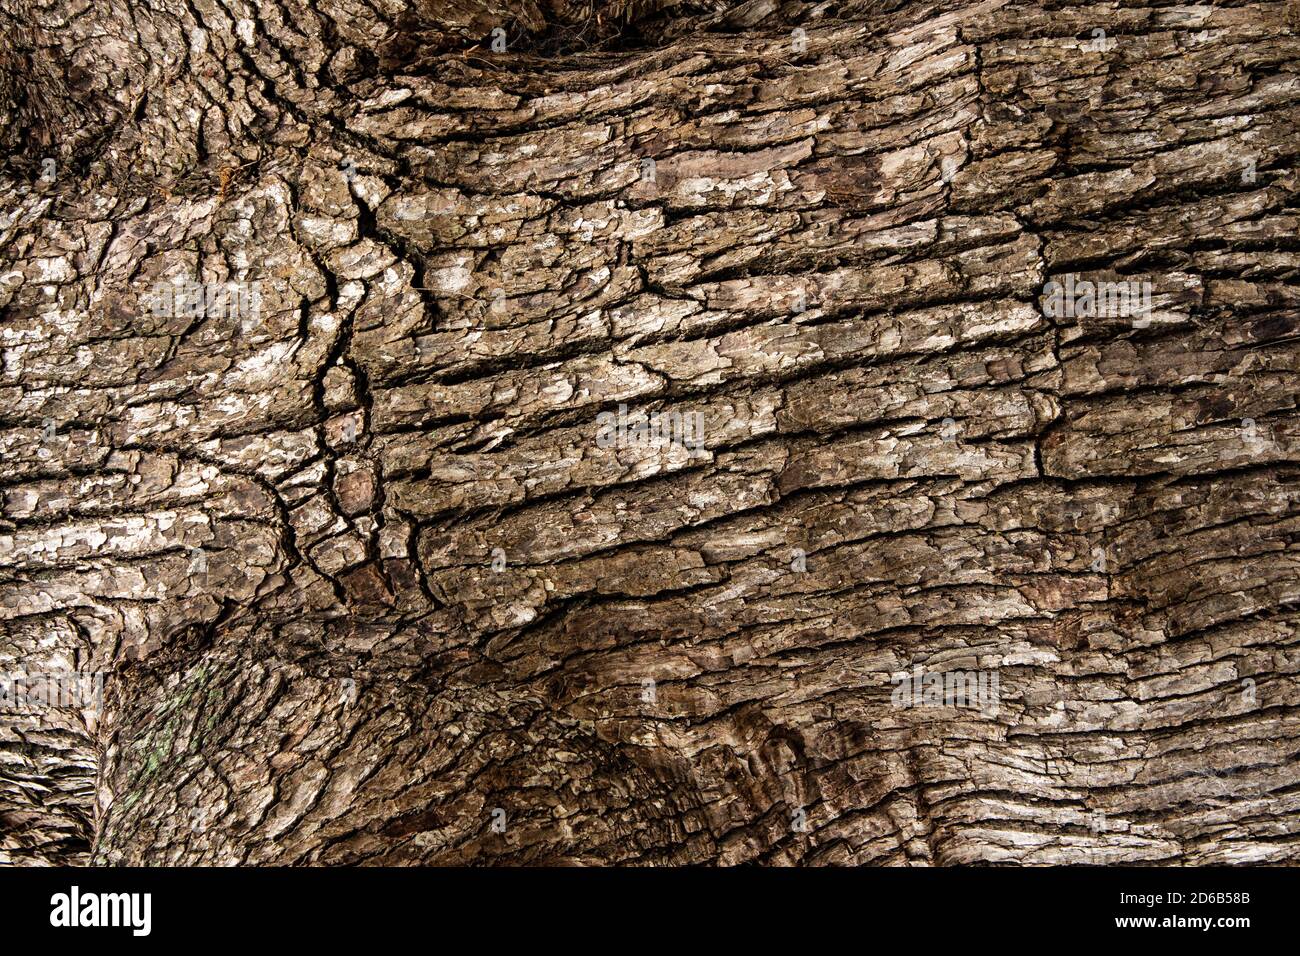 Tree timber bark wood close up ideal as natural environment graphic background wallpaper Stock Photo